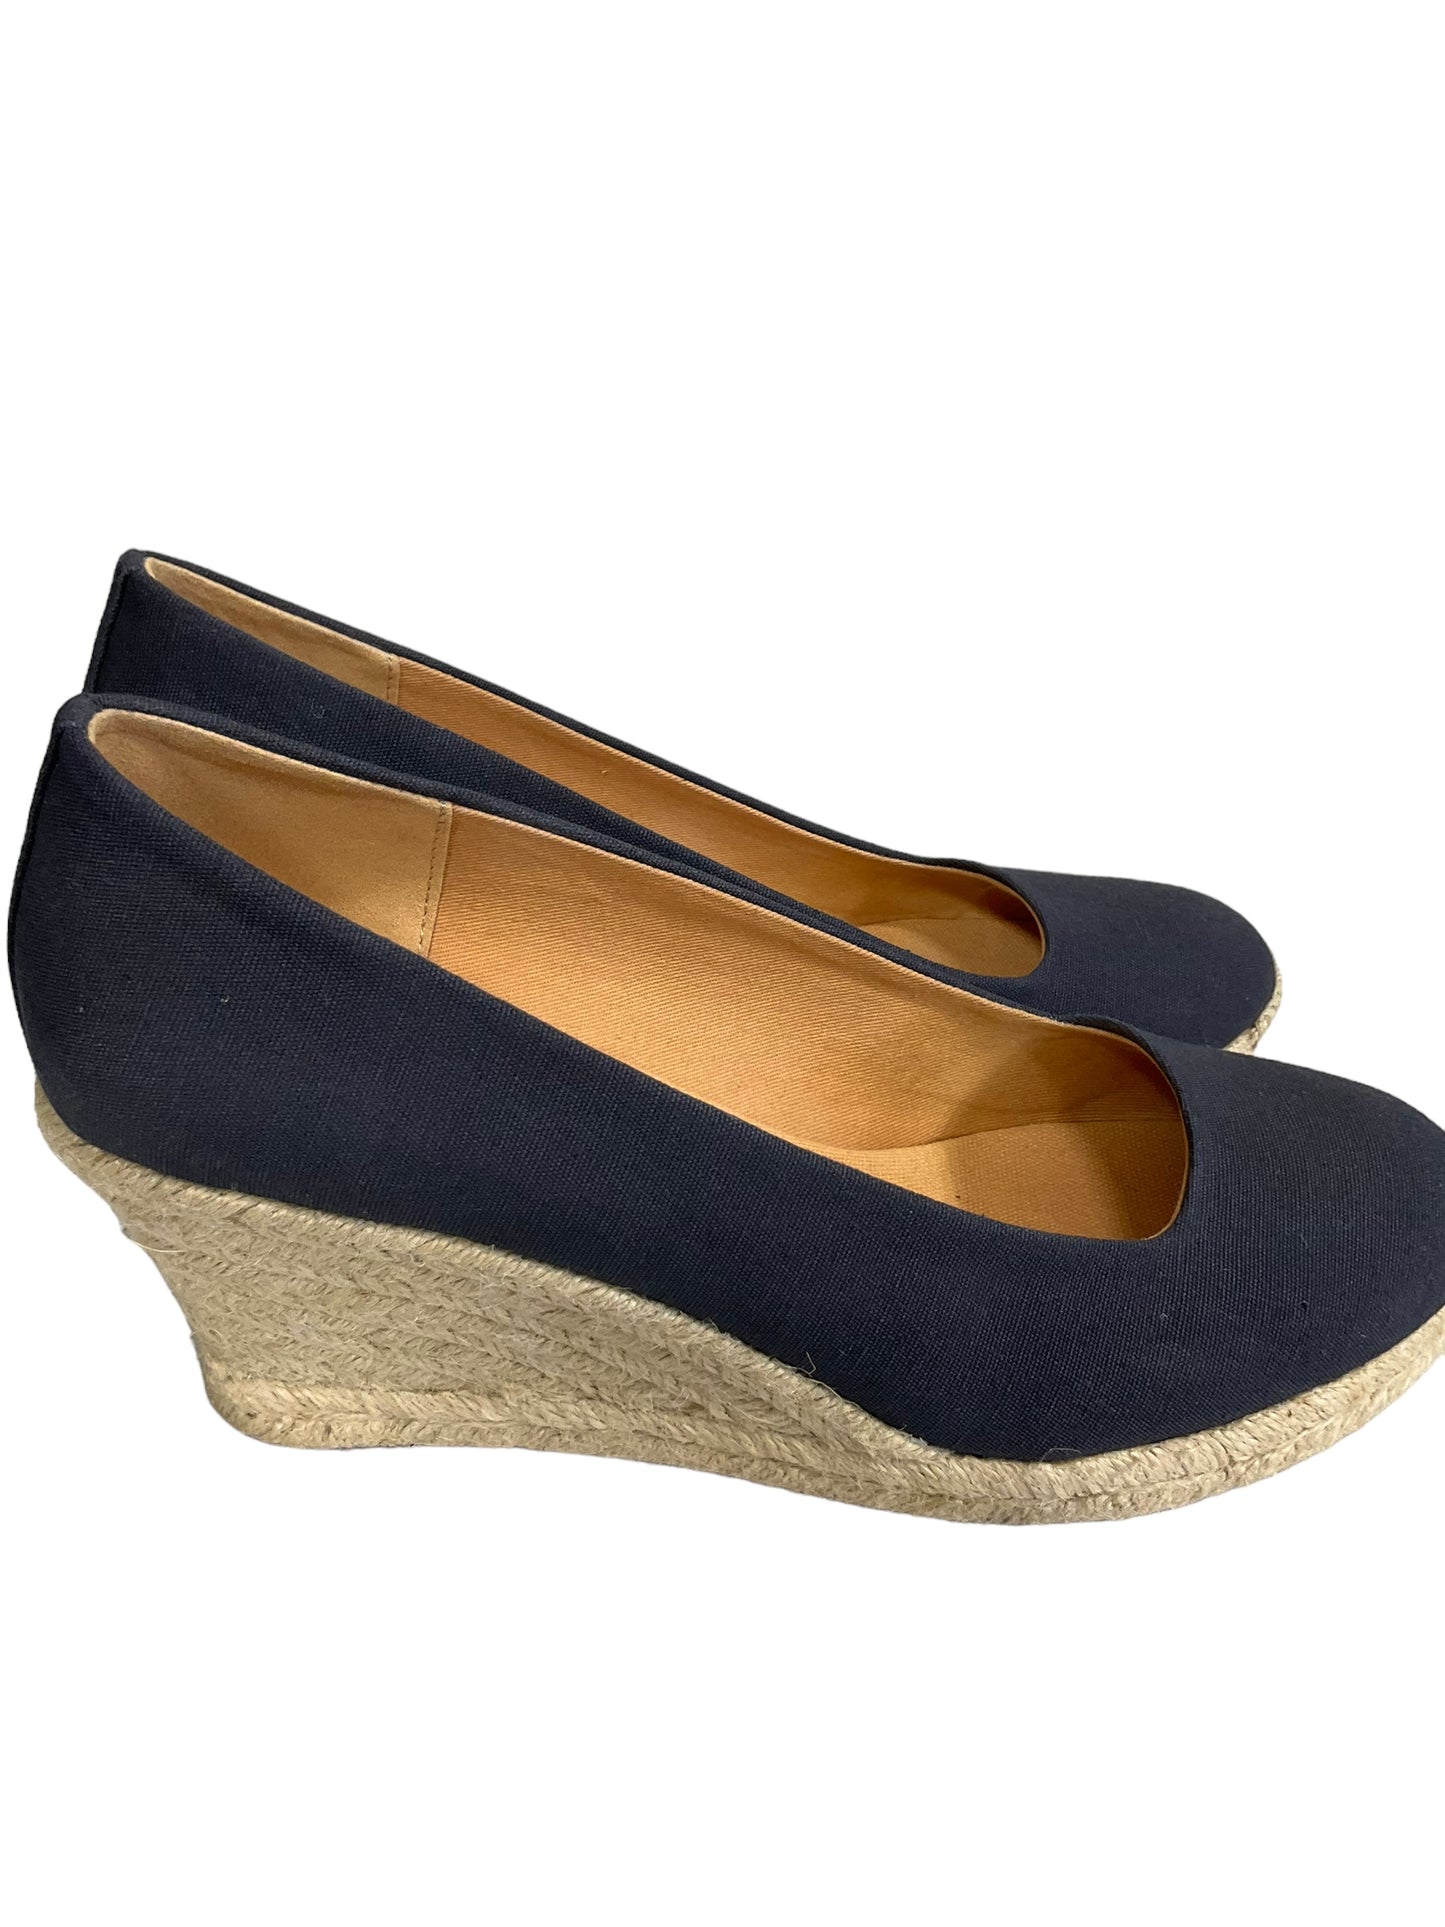 Shoes Heels Wedge By J. Crew  Size: 9.5